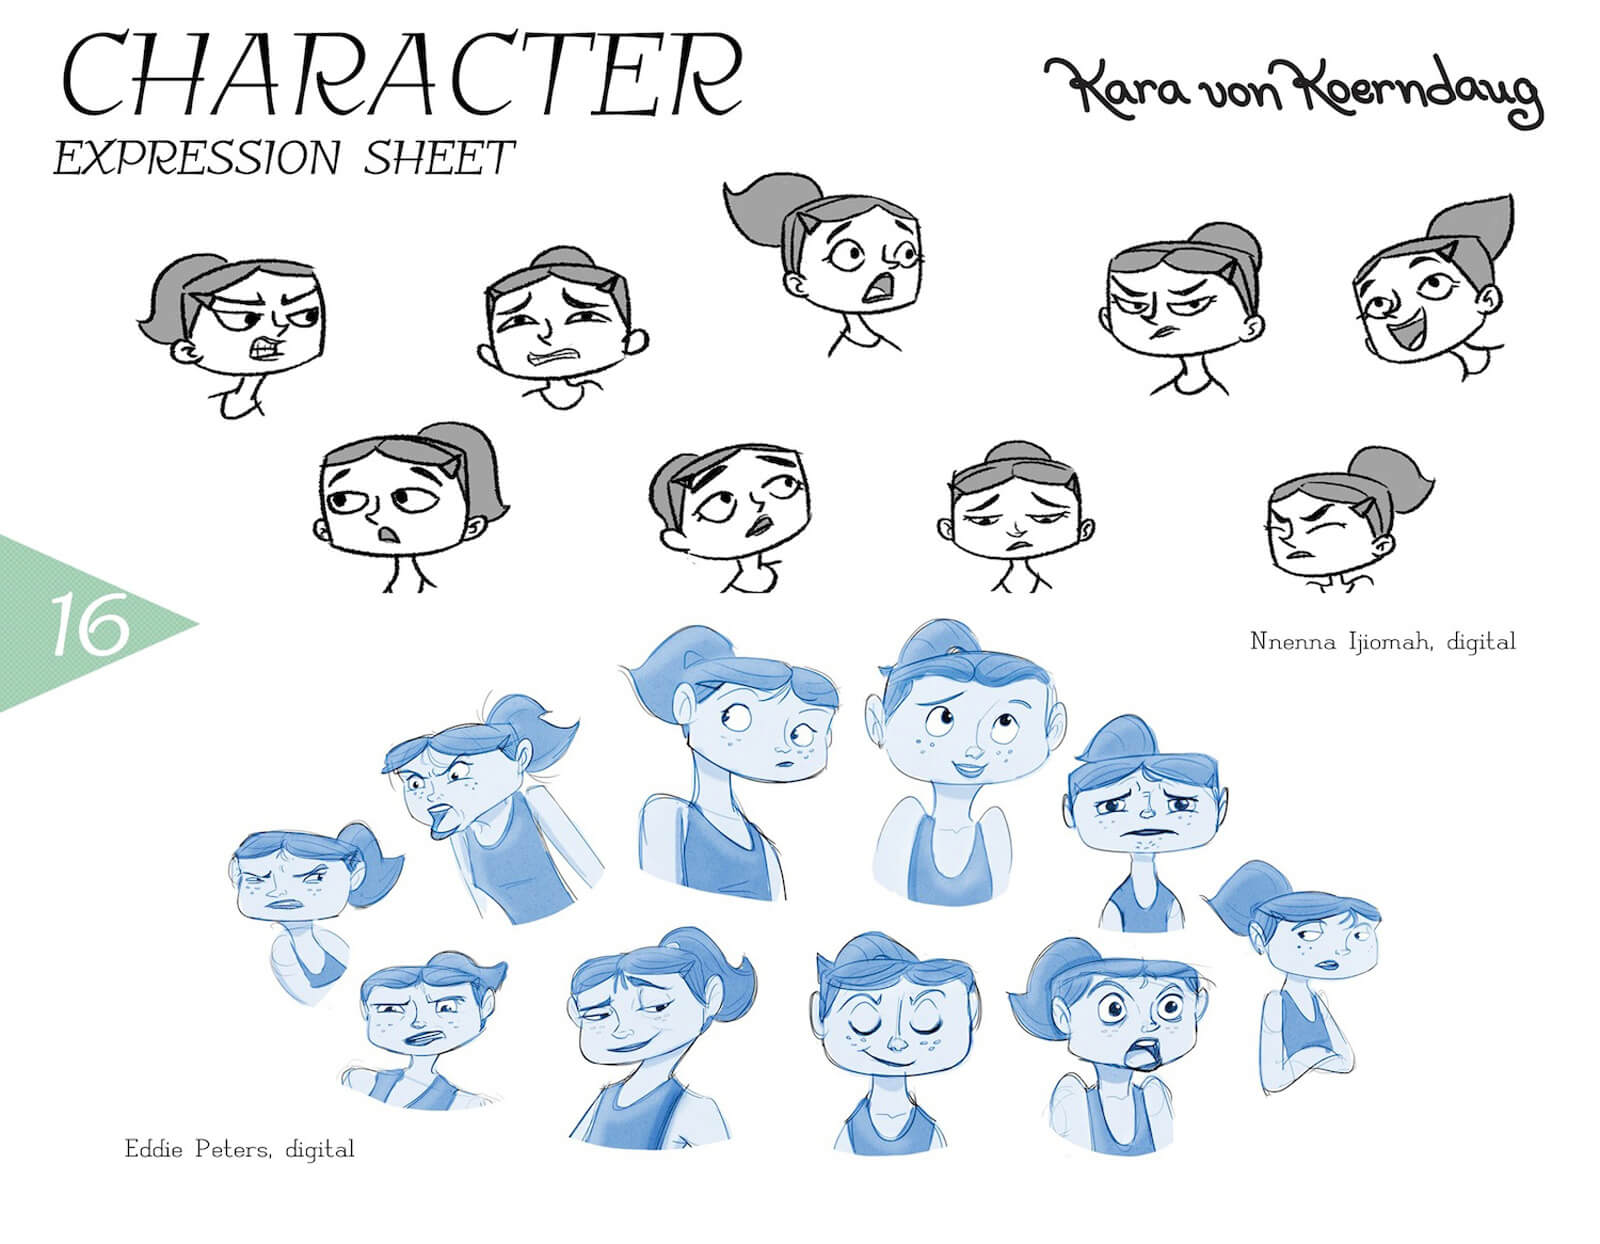 Expression sheet for Kara von Koerndaug, depicting black-and-white sketches of anger, sadness, smugness, and others